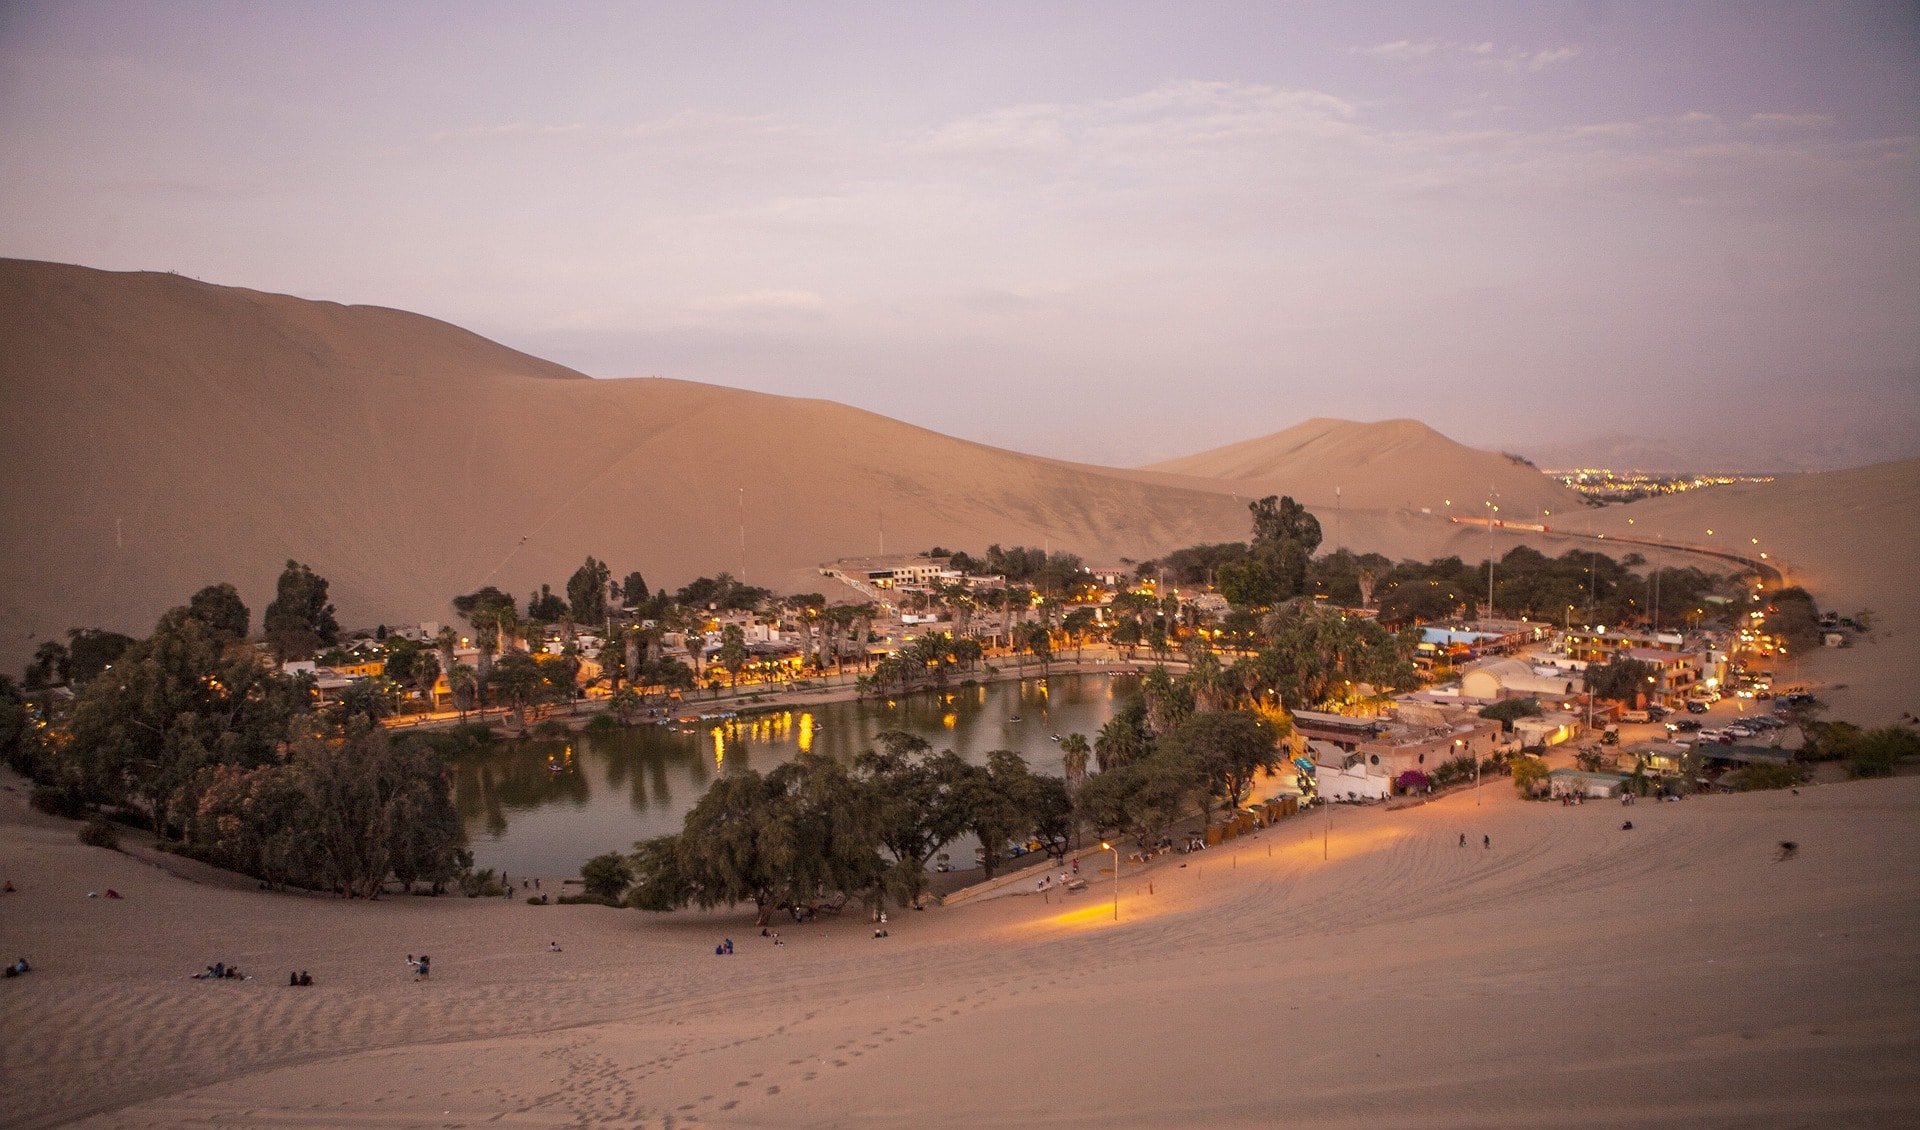 An oasis in the Sand Dunes – Huacachina